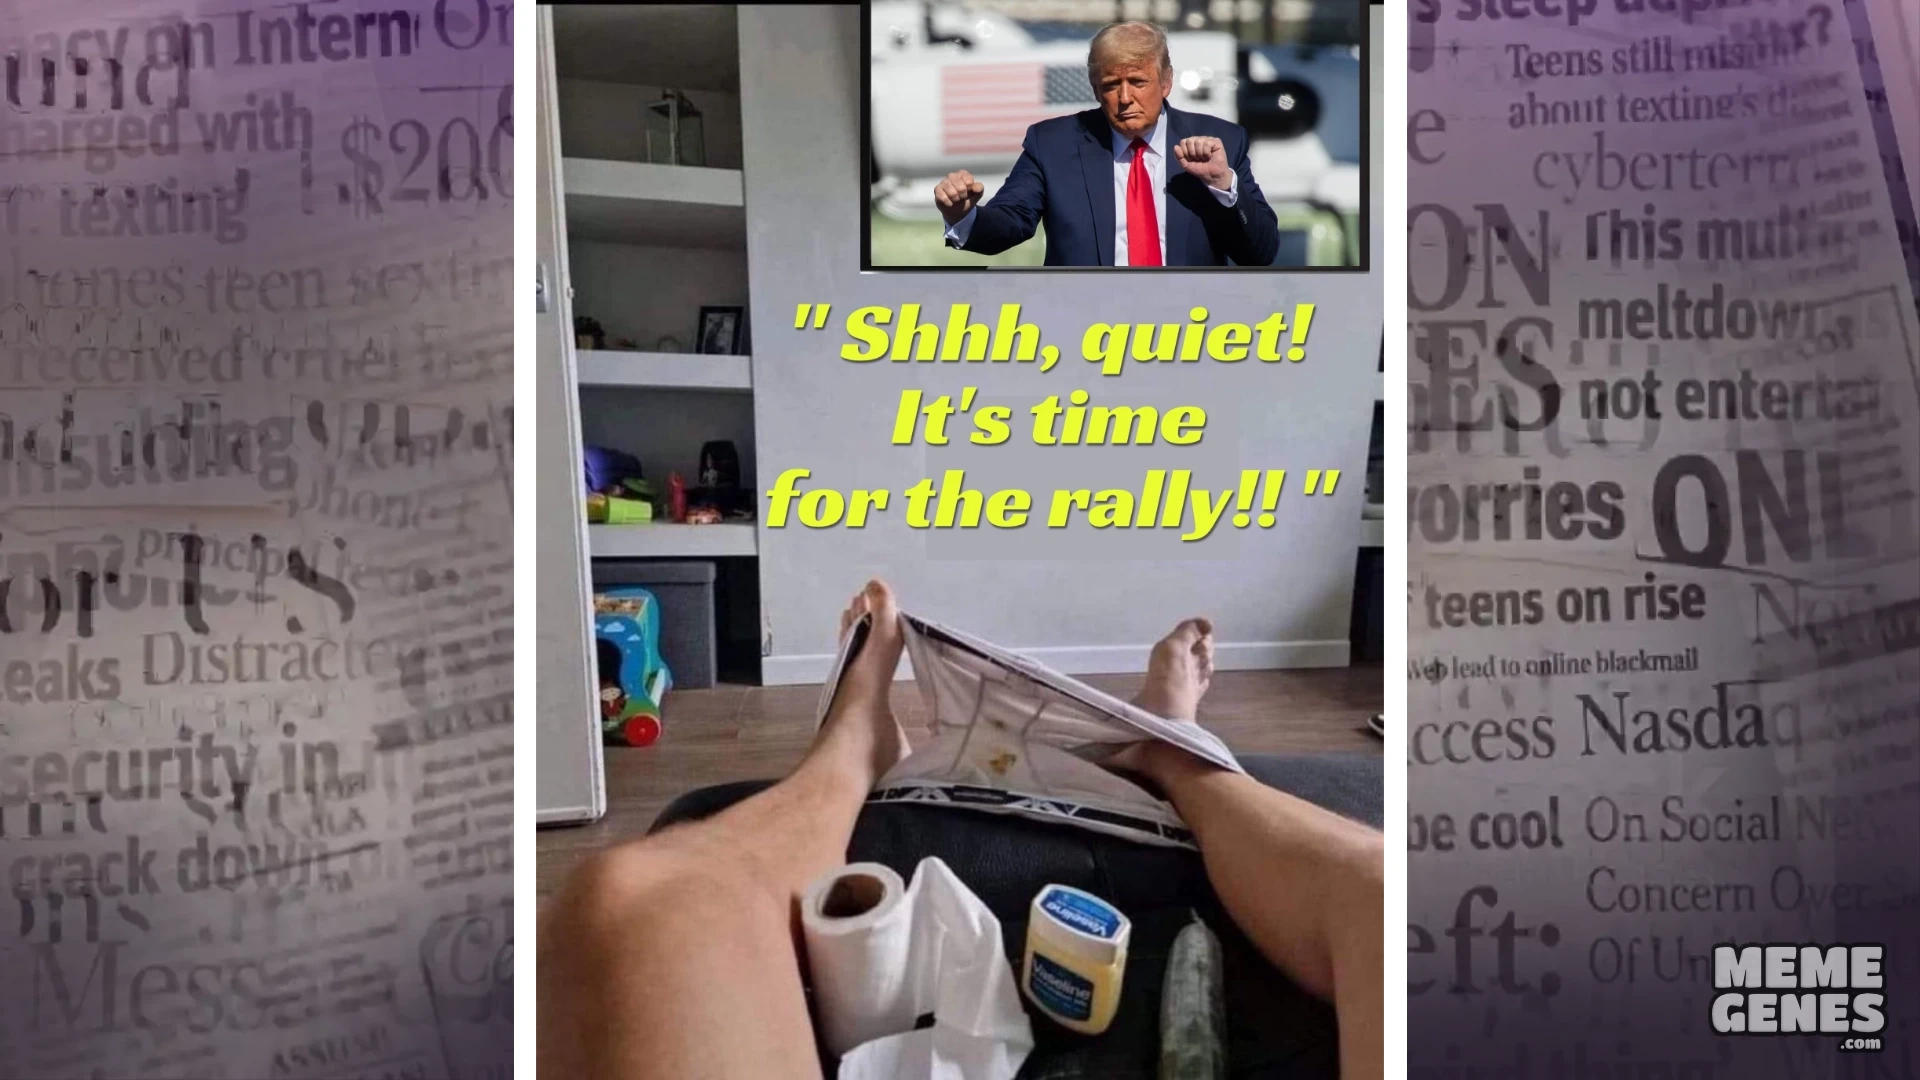 Shhh, it's time for the Trump Rally - Featured image